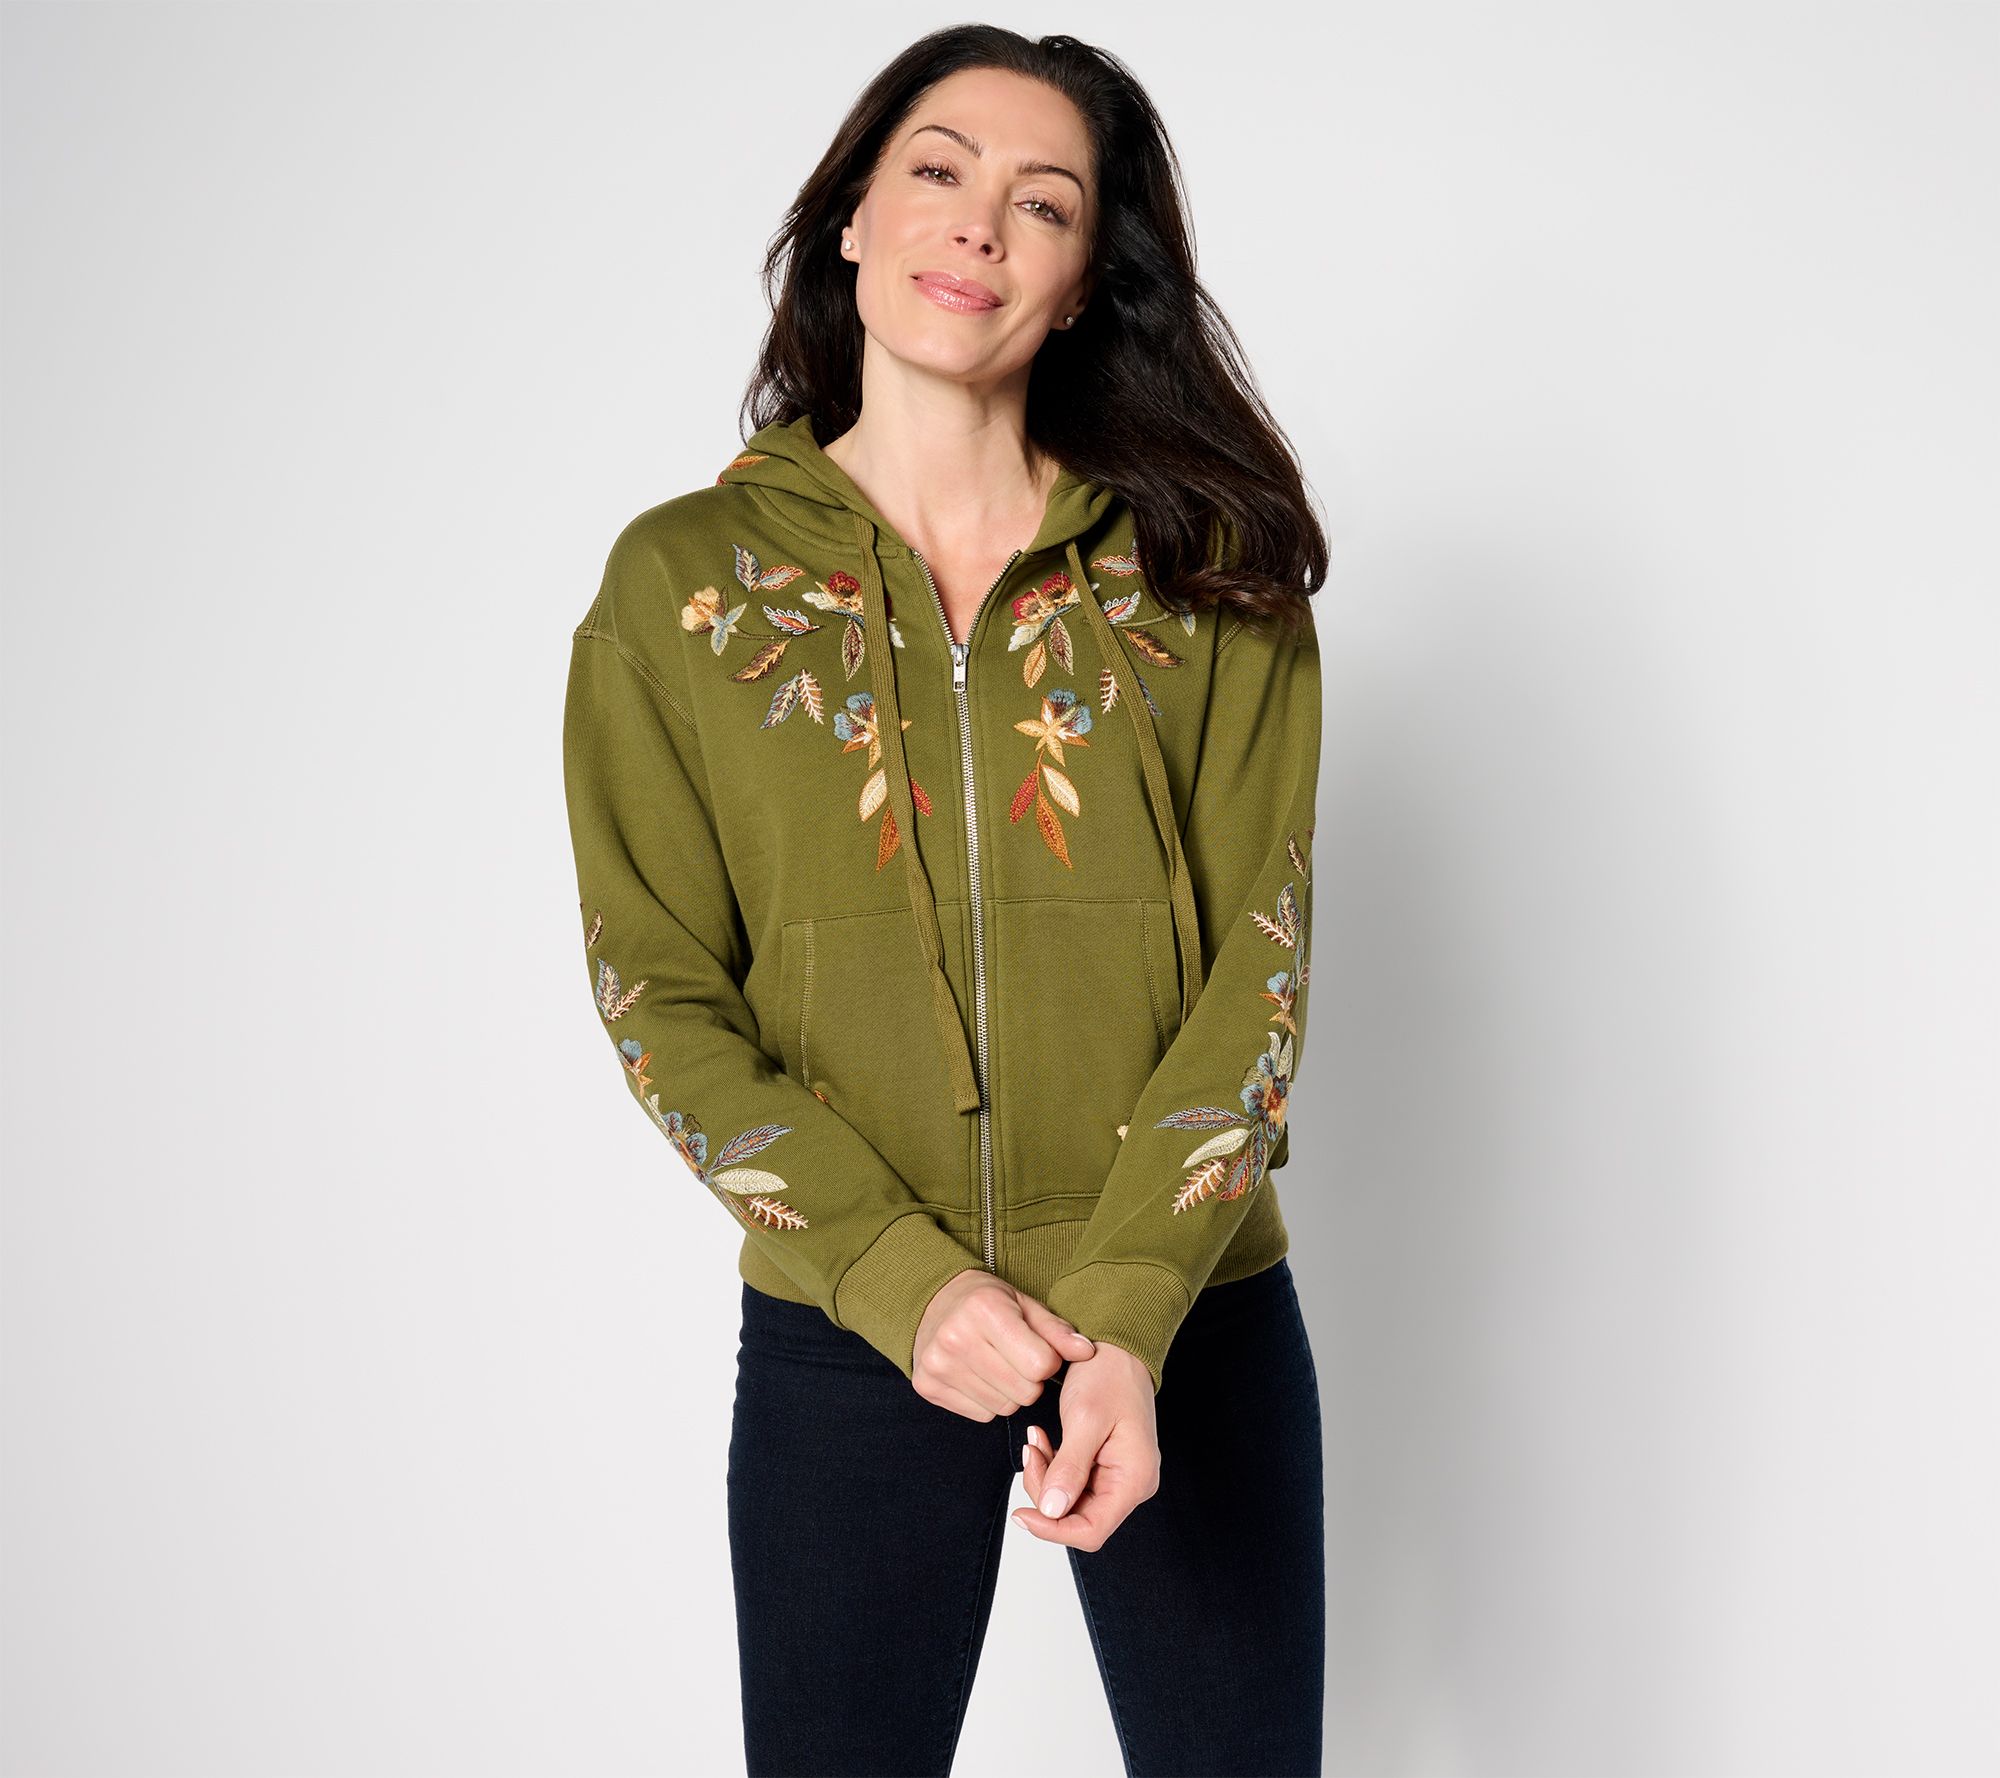 Driftwood Jeans Embroidered Zip-Up Hoodie - Feathery Leaf